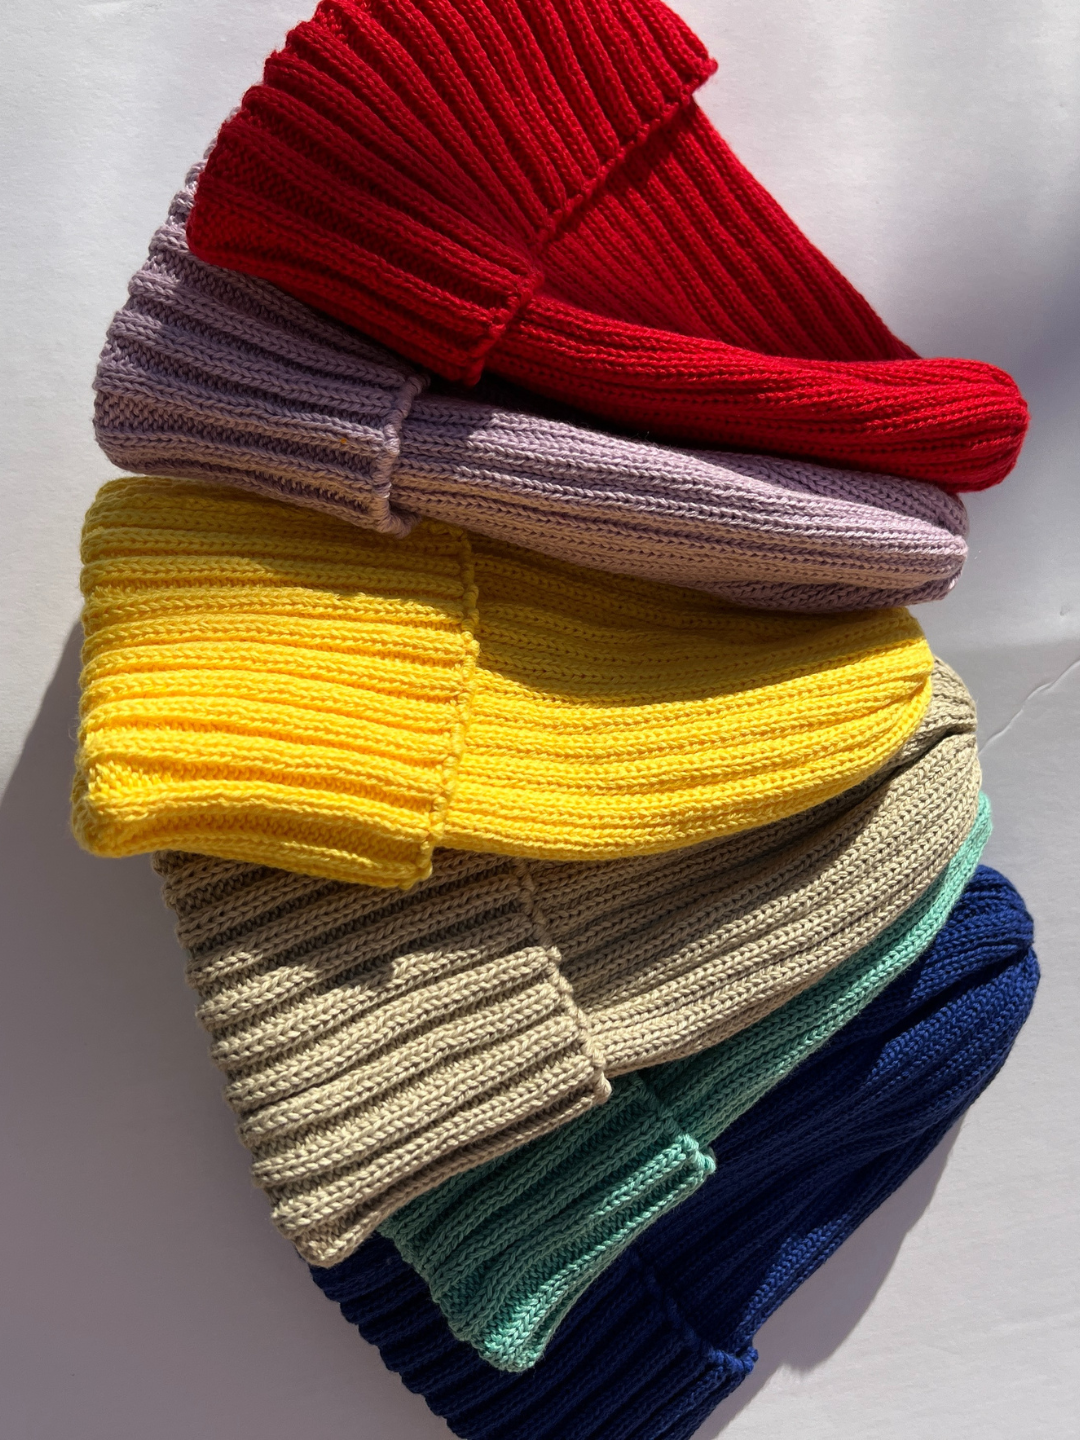 Khaki | Group of lilac, red, khaki, blue, mint and yellow baby beanies on a white background.